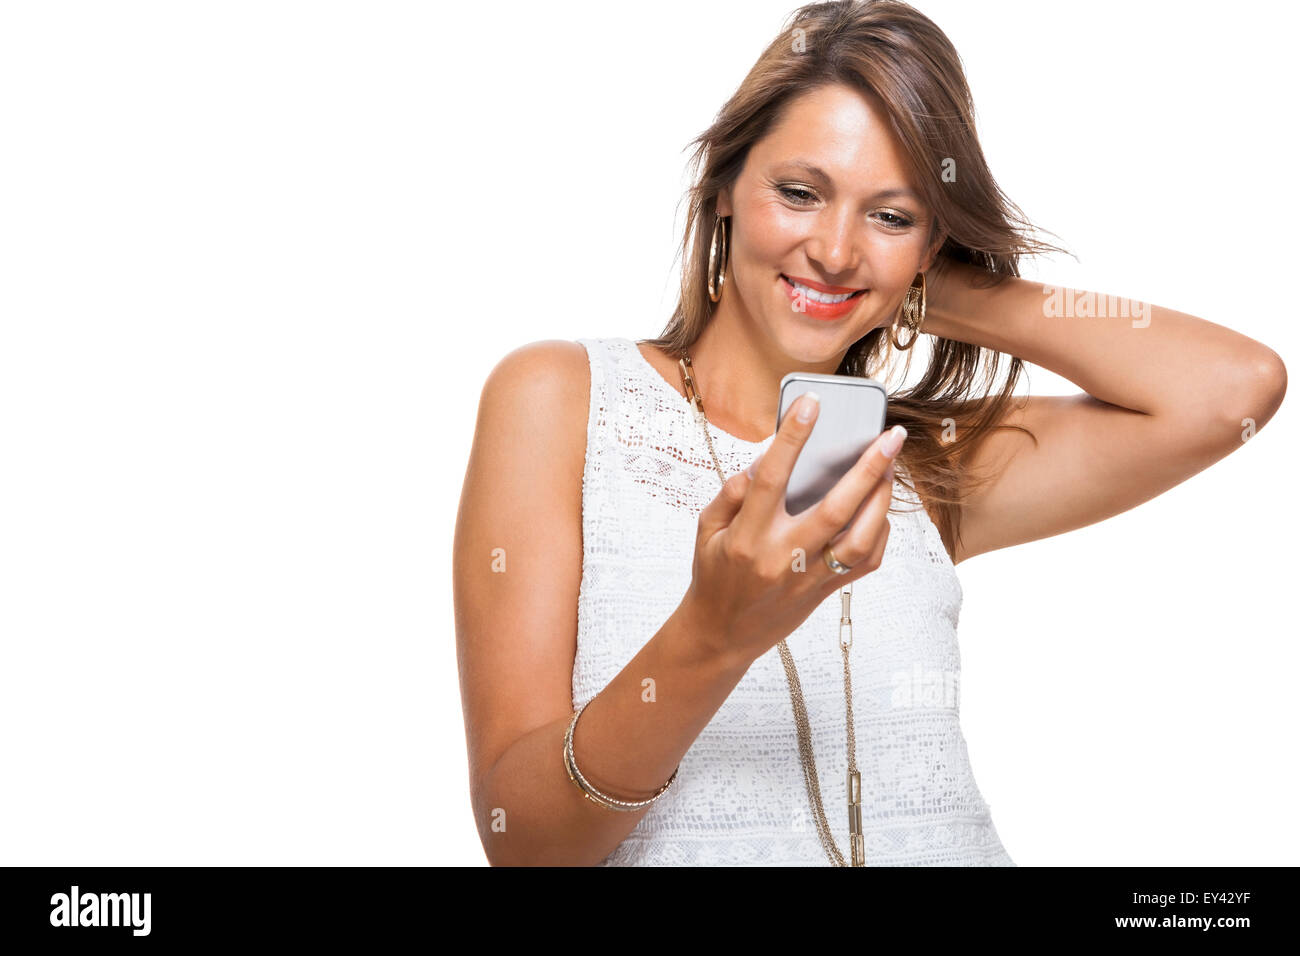 Vivacious attractive woman reacting to a text message on her mobile phone flicking her hair in the air and staring at the phone Stock Photo